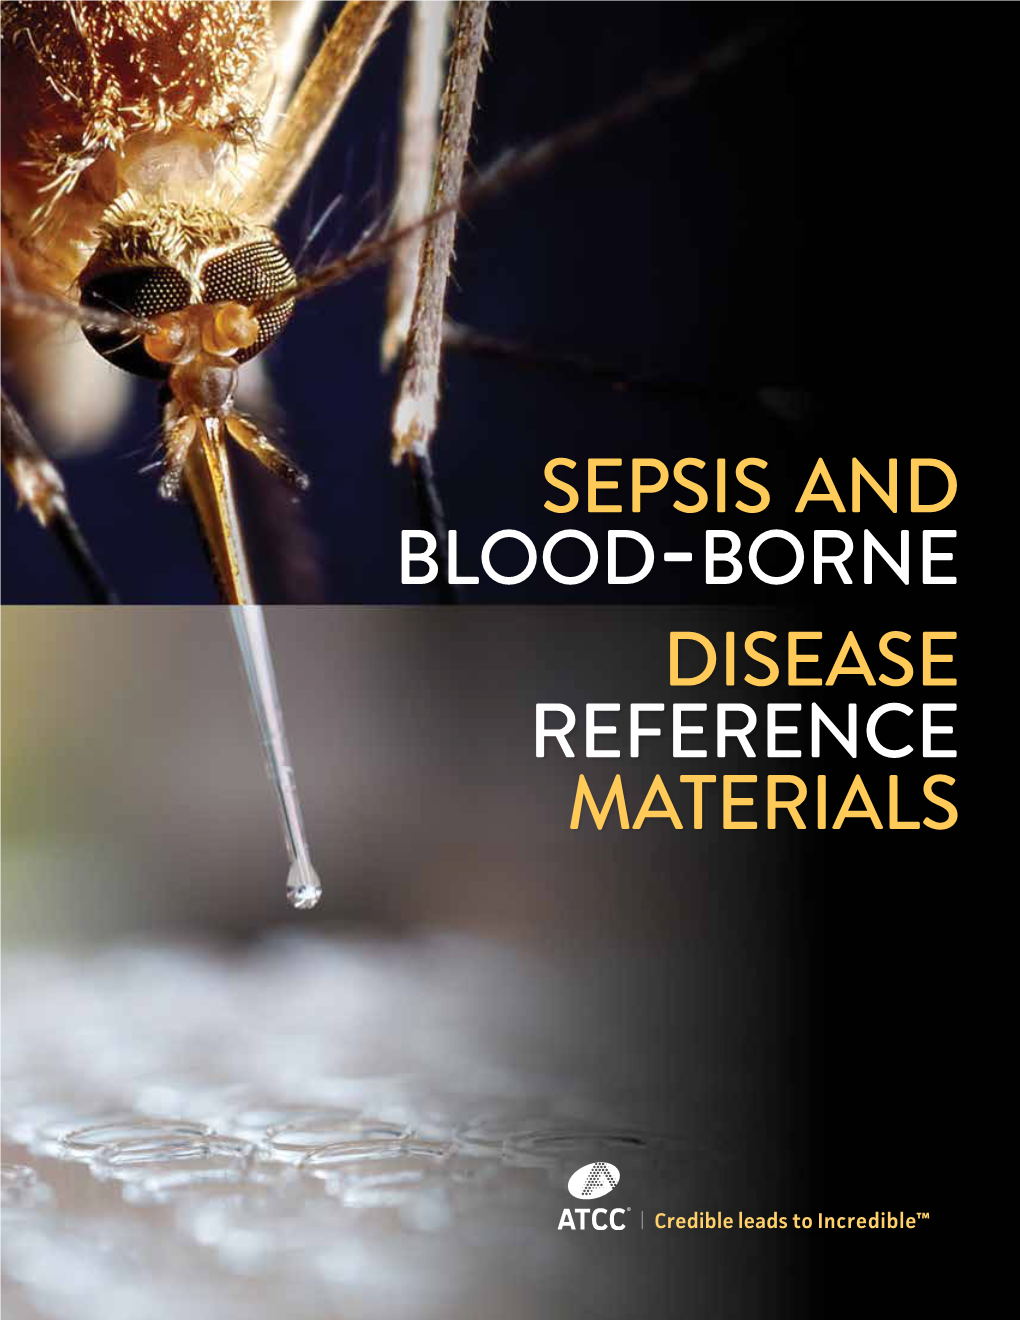 Sepsis and Blood-Borne Disease Reference Materials